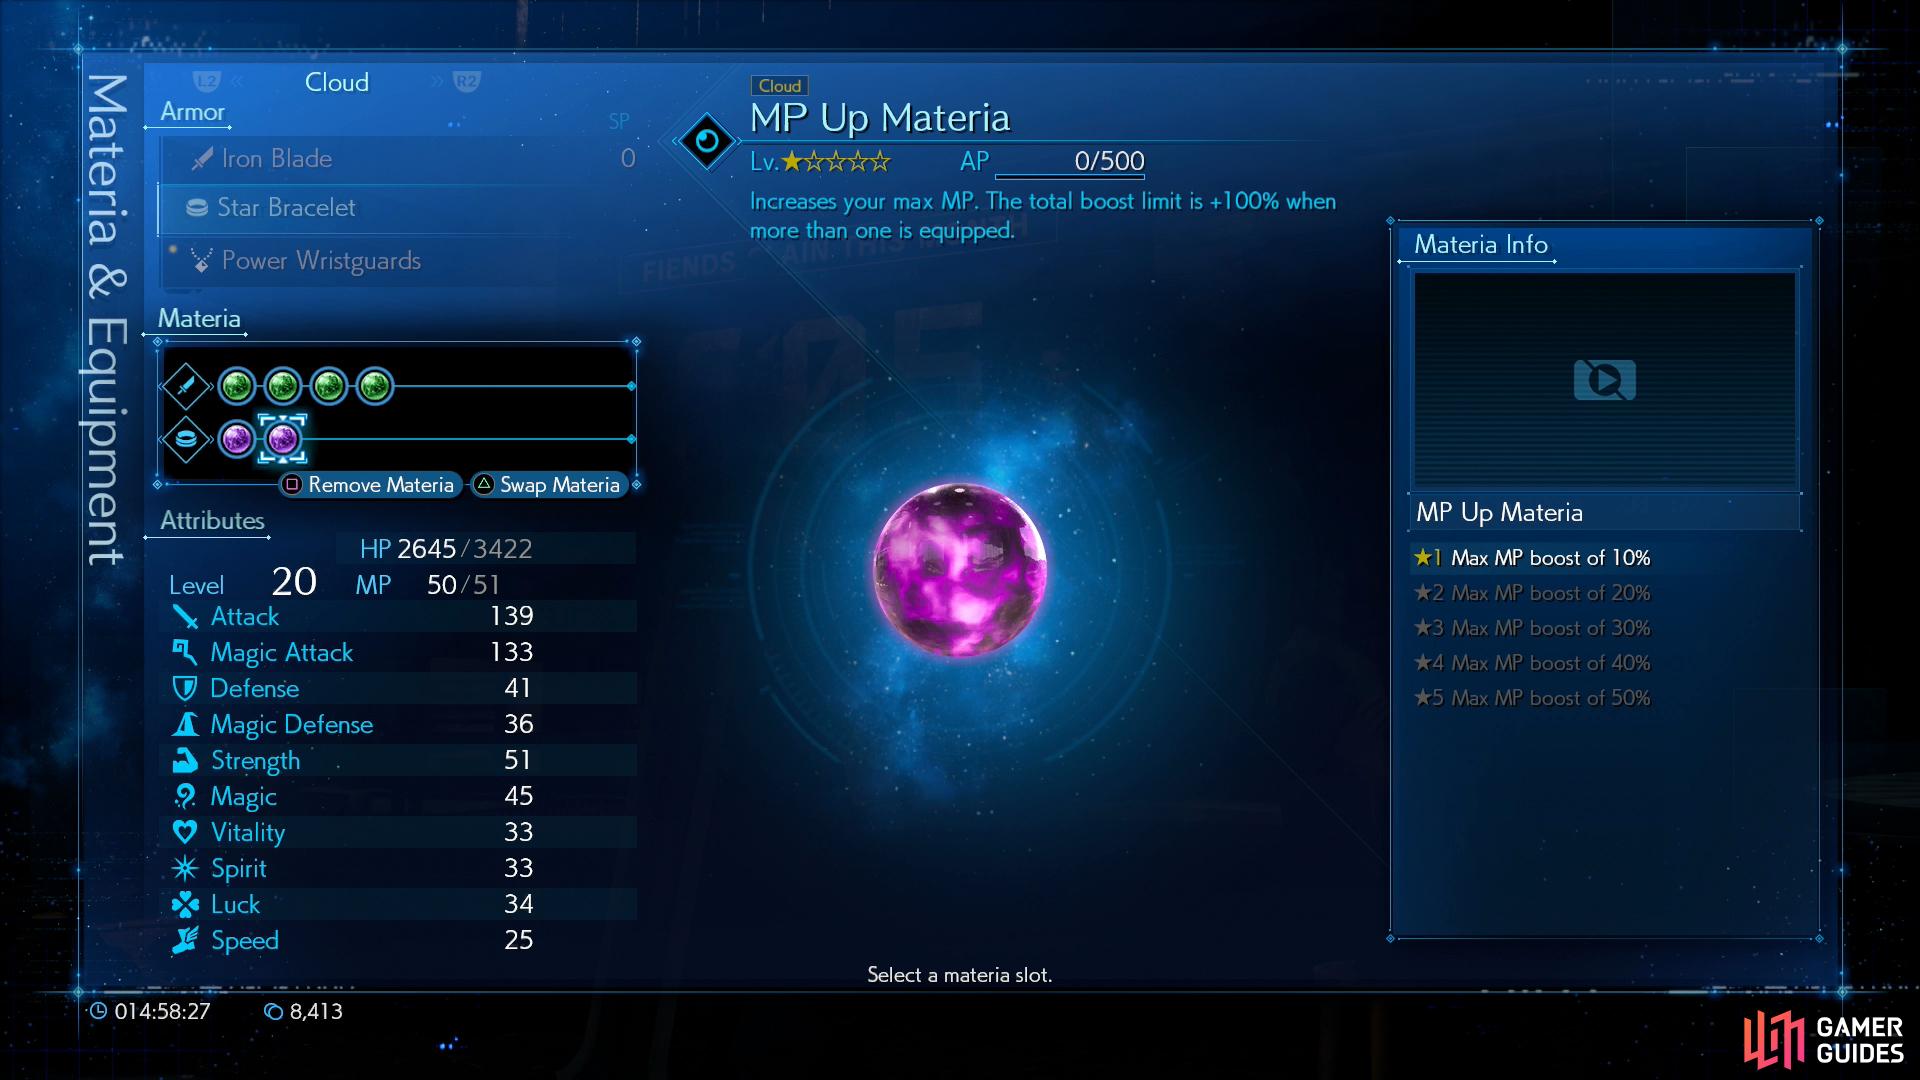 The best of these is easily the MP Up Materia, which will boost your MP by +10% per level.